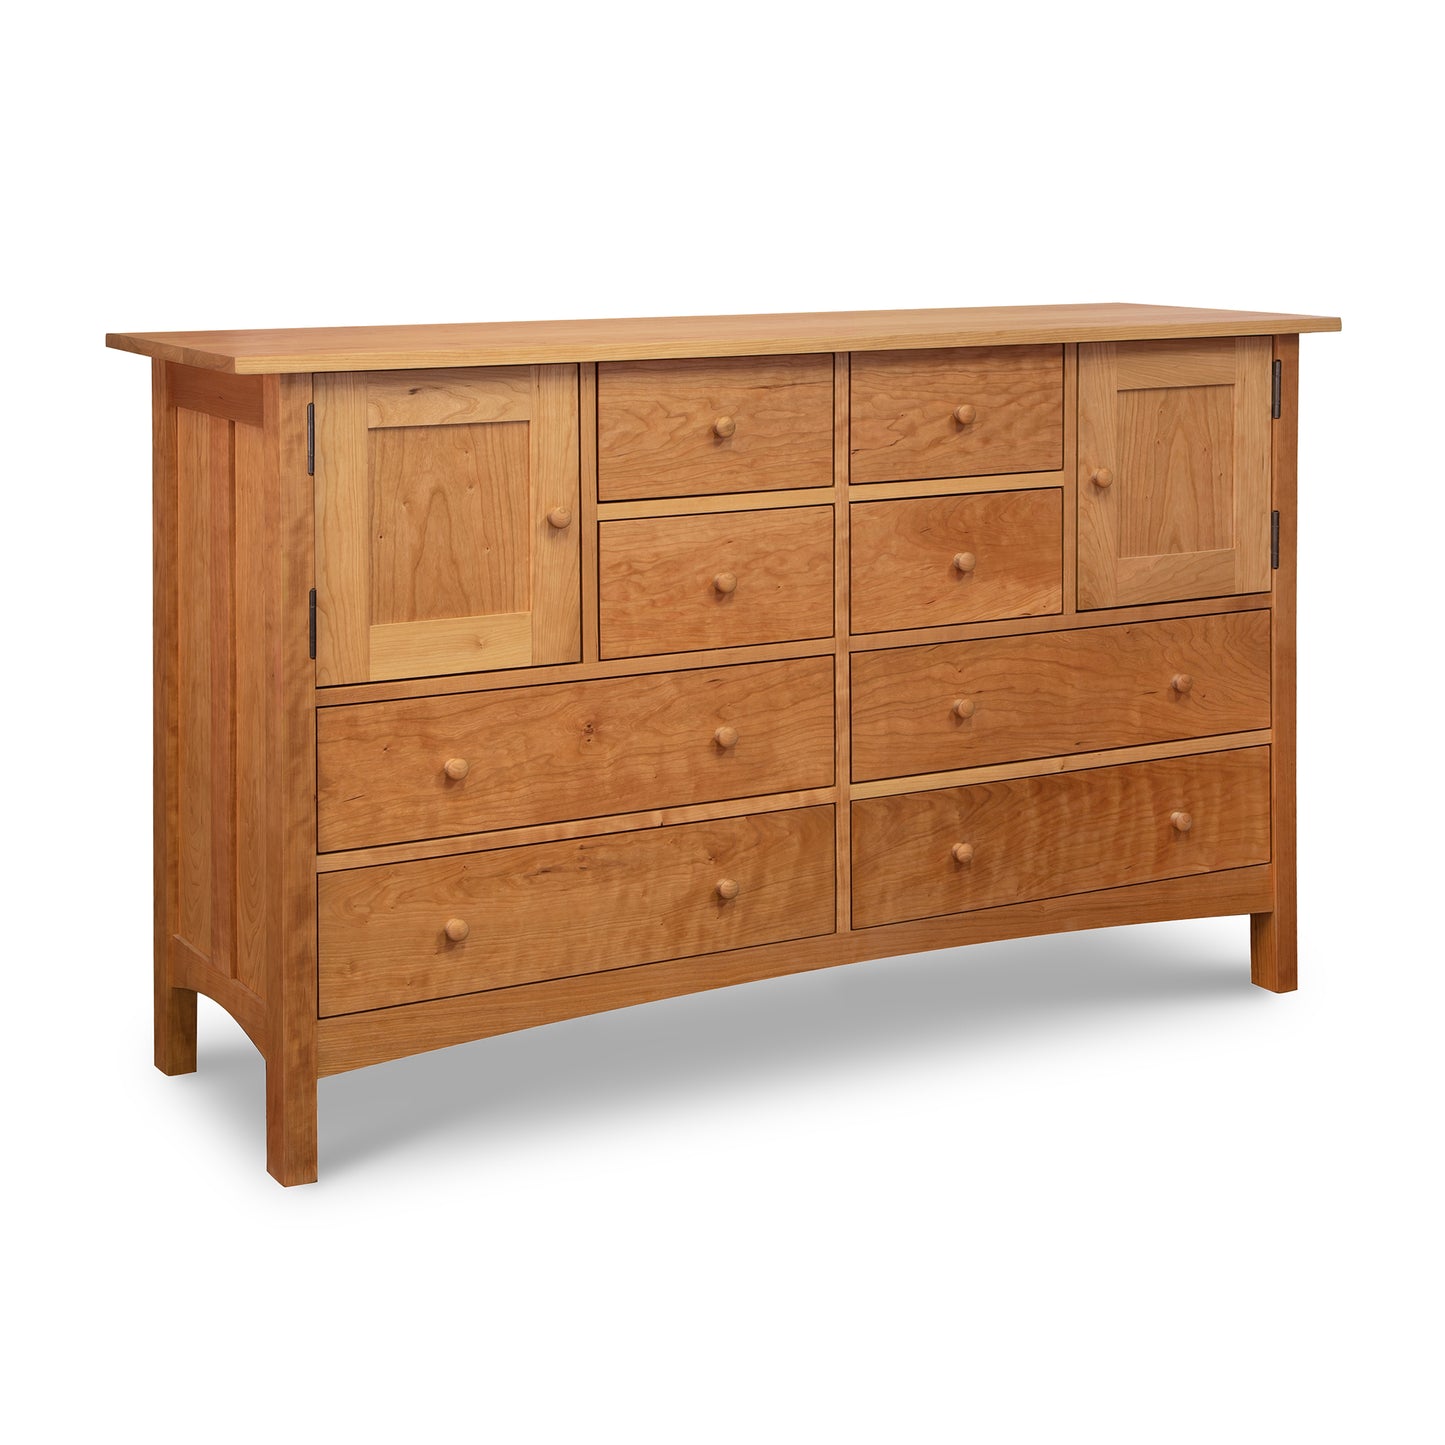 A Burlington Shaker 8-Drawer 2-Door Dresser from Vermont Furniture Designs with multiple drawers of varying sizes on a white background.